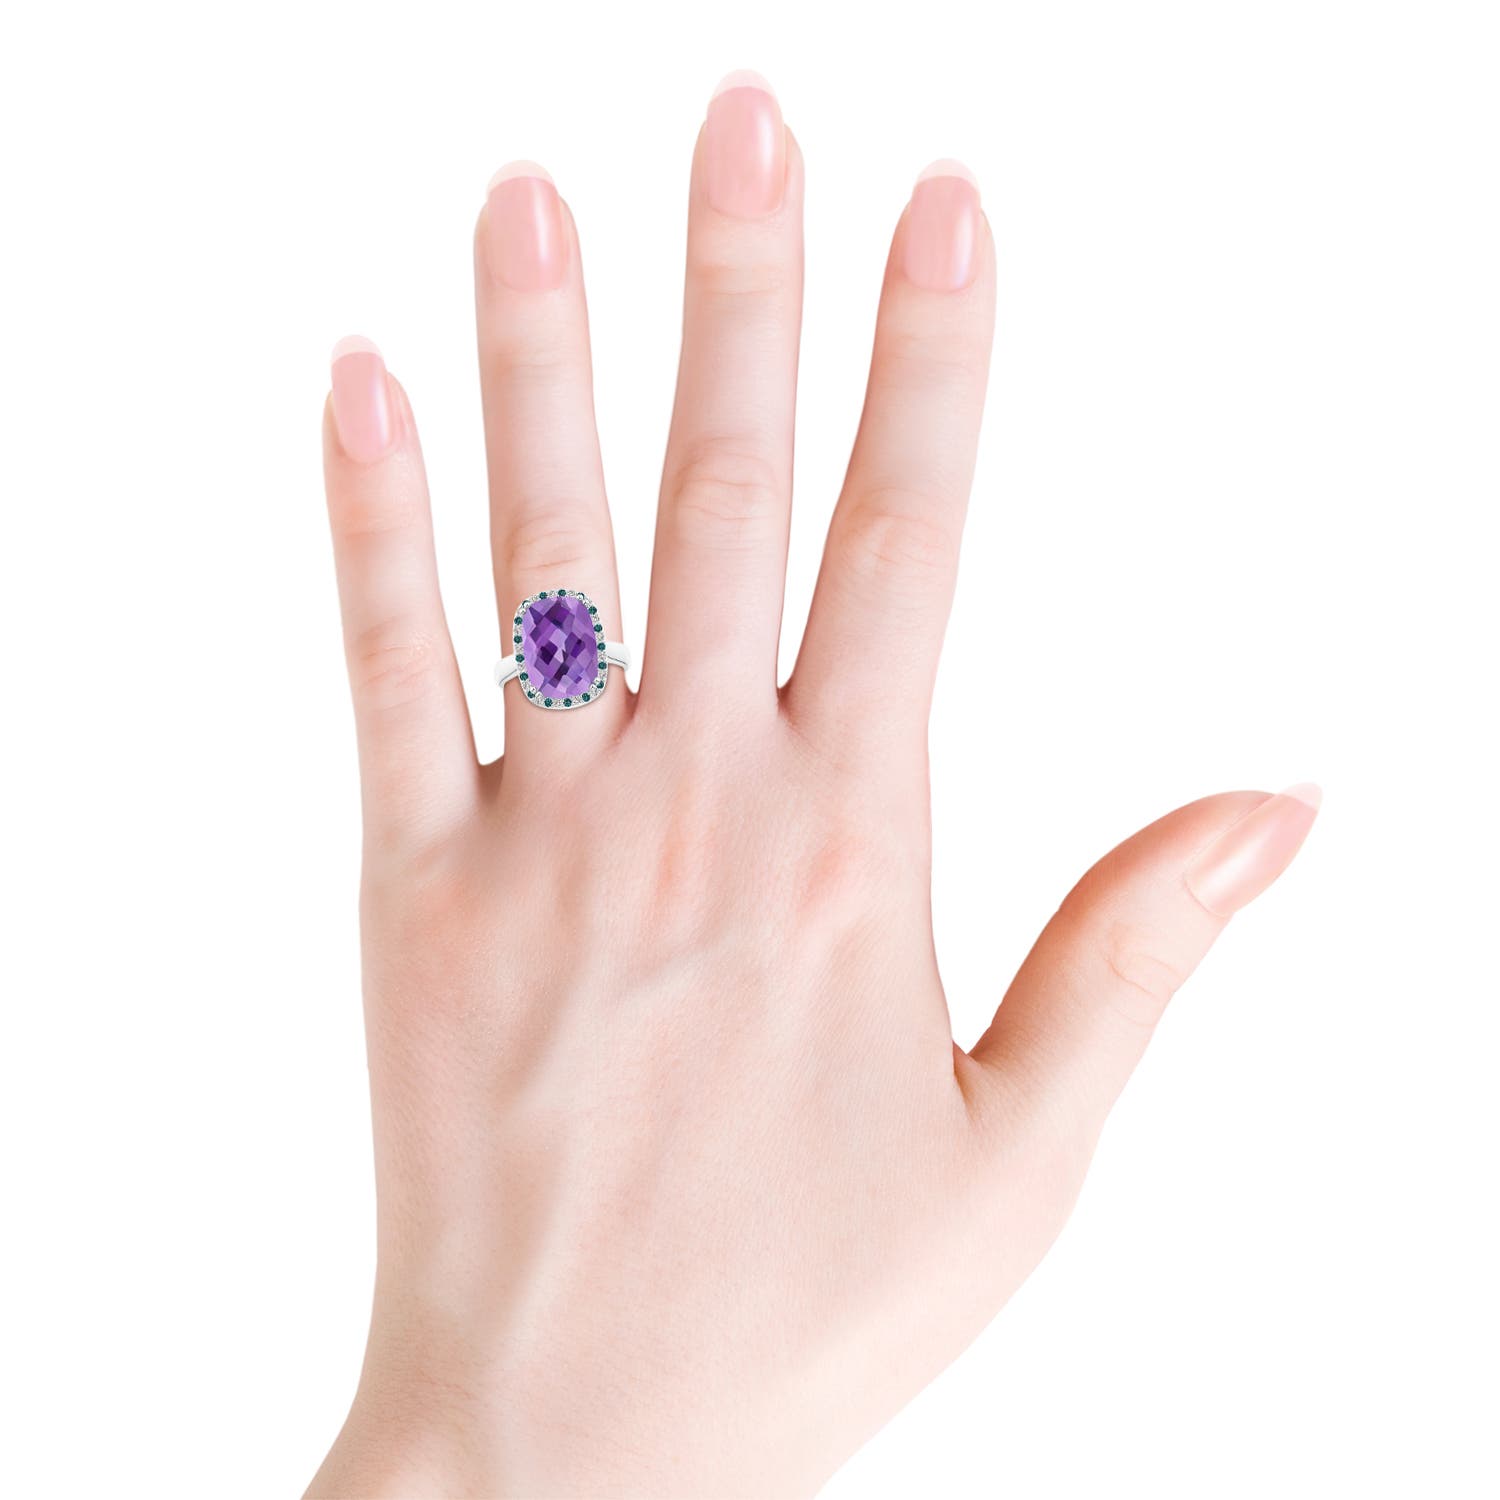 AA - Amethyst / 6.27 CT / 14 KT White Gold